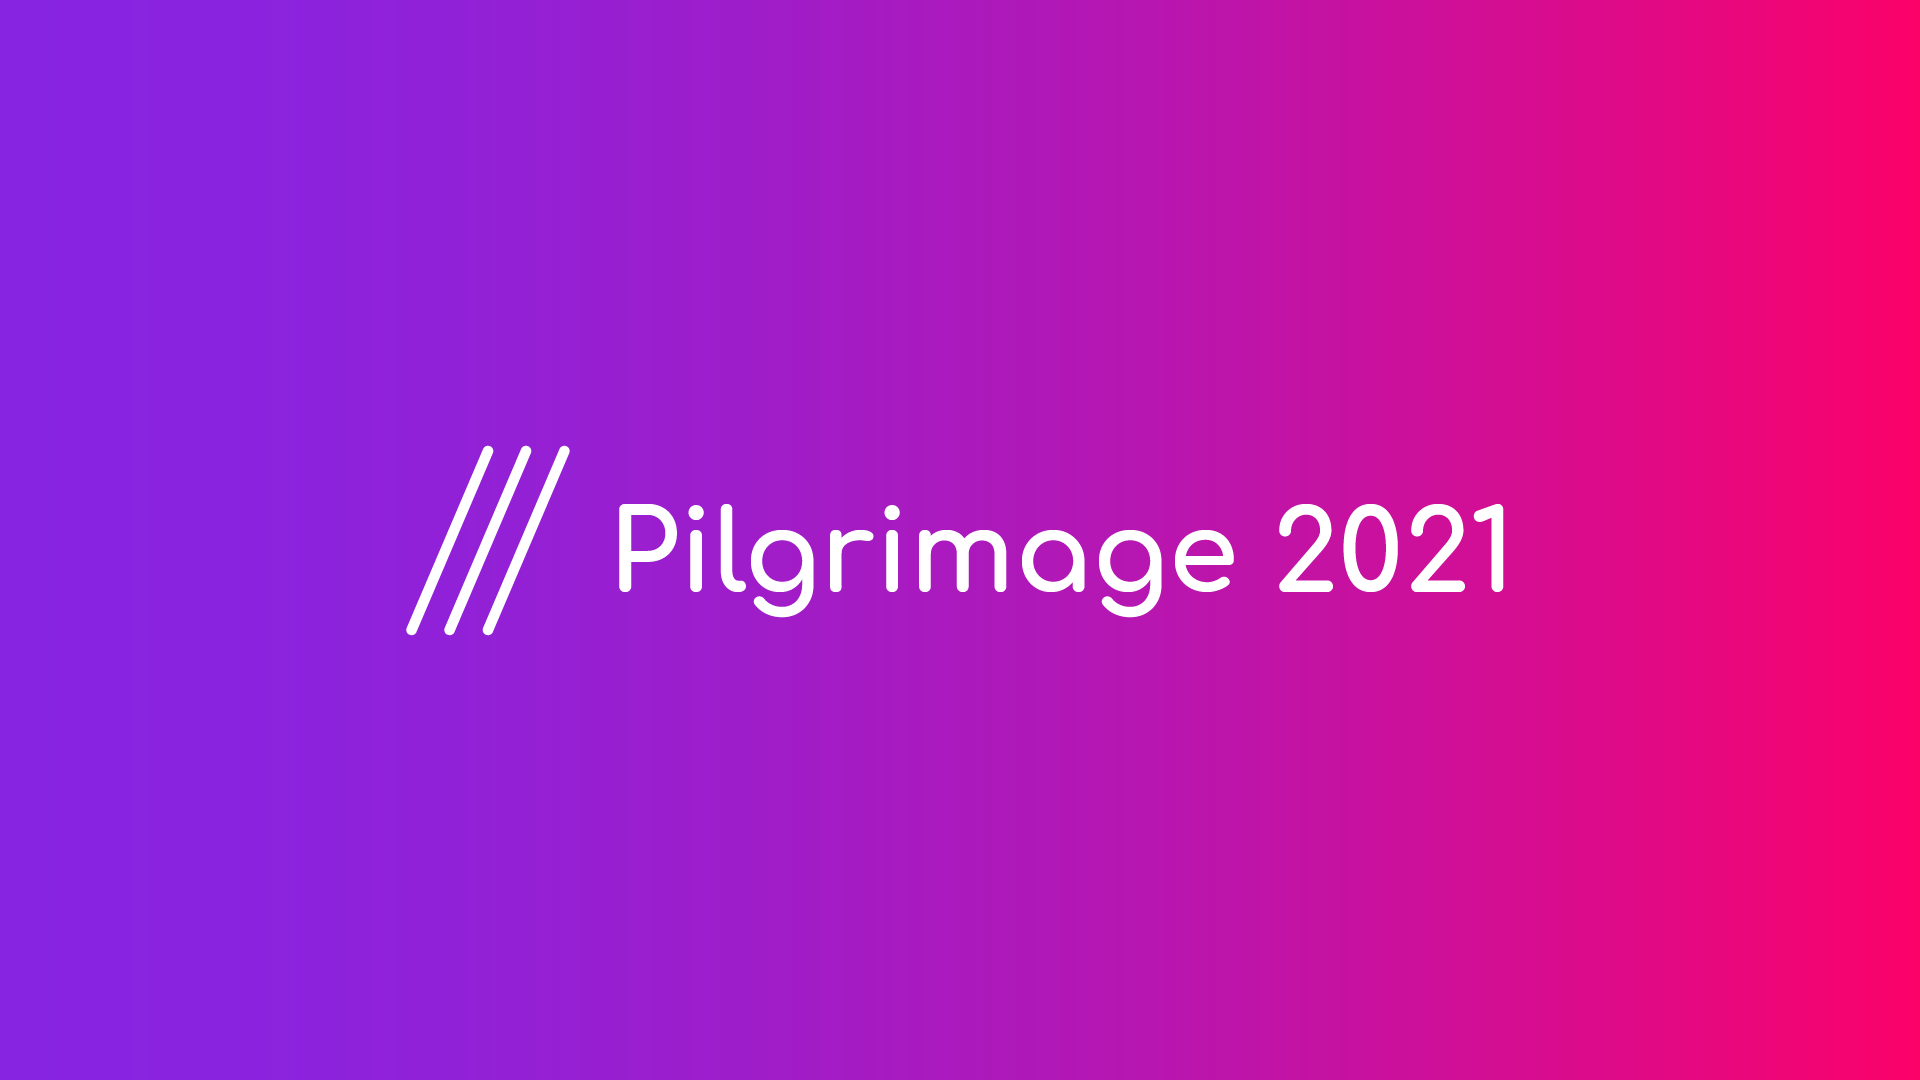 Pilgrimage 2021 To Take Place In-Person and Virtually